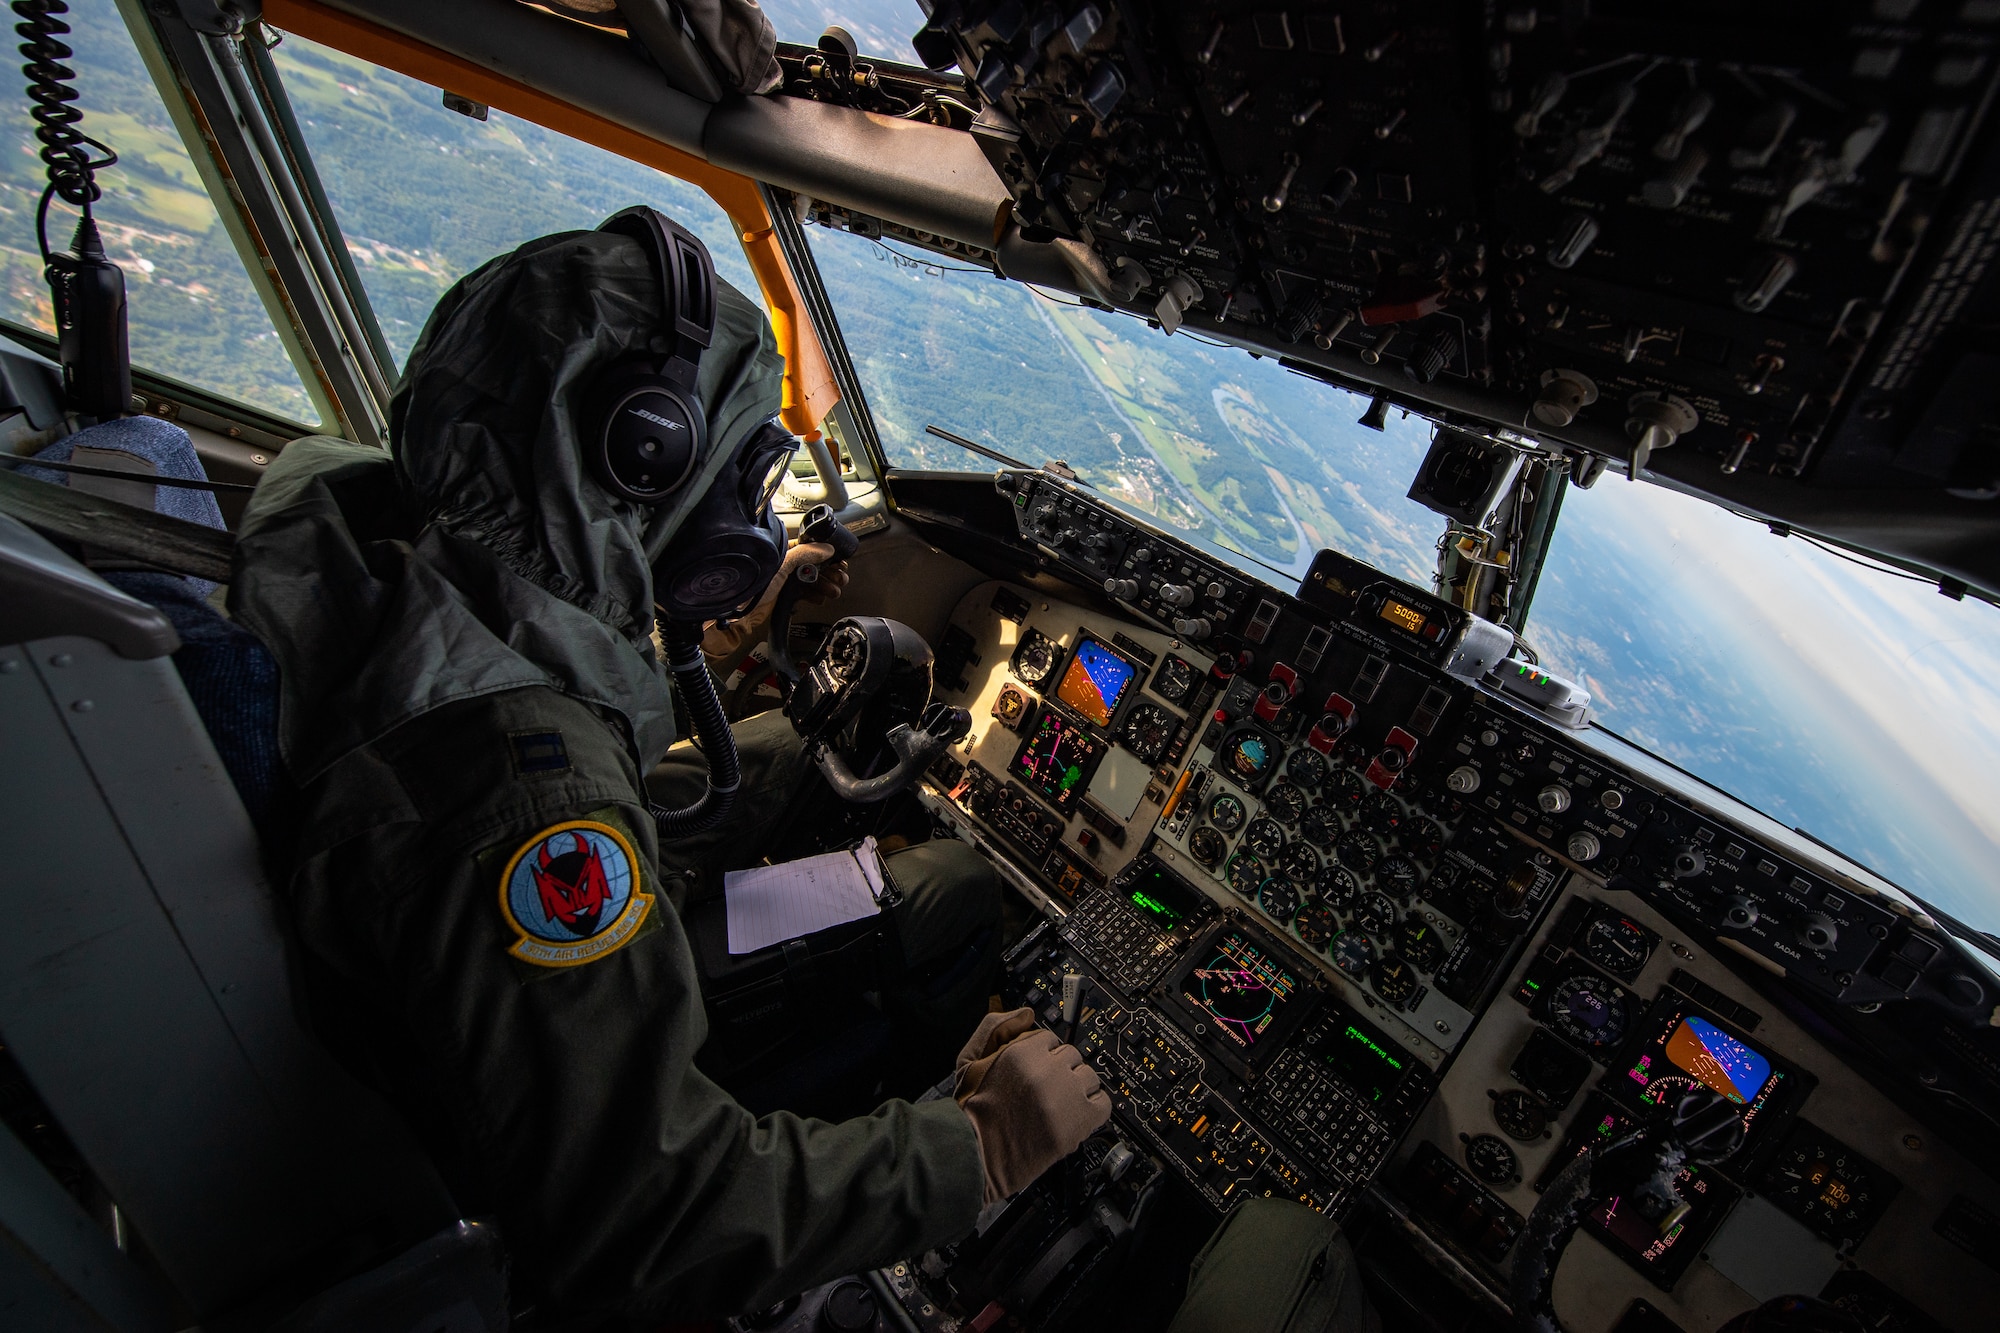 U.S. Air Force Capt. Andrew Bragado, 50th Air Refueling Squadron pilot, wears Chemical Biological Radiological Nuclear and Explosive gear on a flight during the 6th Air Refueling Wing’s Agile Combat Employment capstone exercise, Aug. 23, 2022.